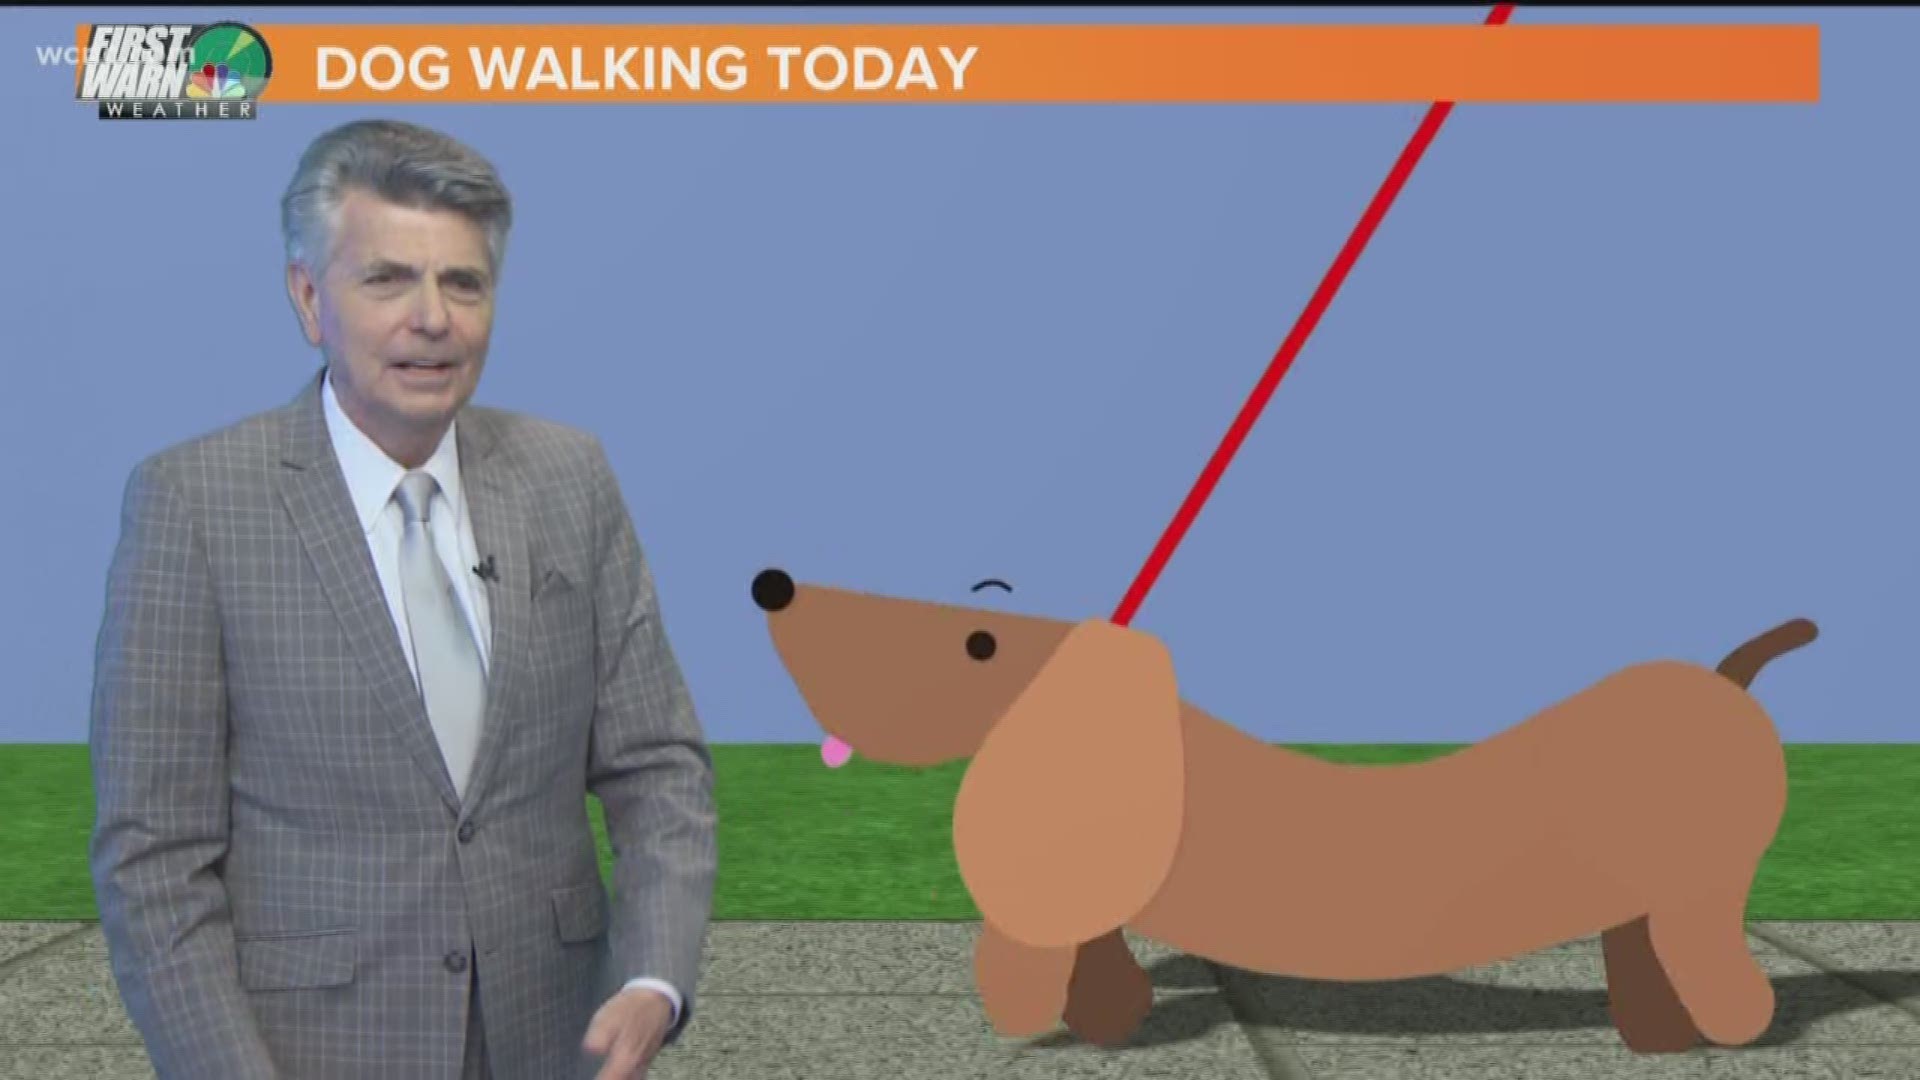 It dog walking season but Larry Sprinkle's dog needs a name! Do you have any ideas? We want to hear them!